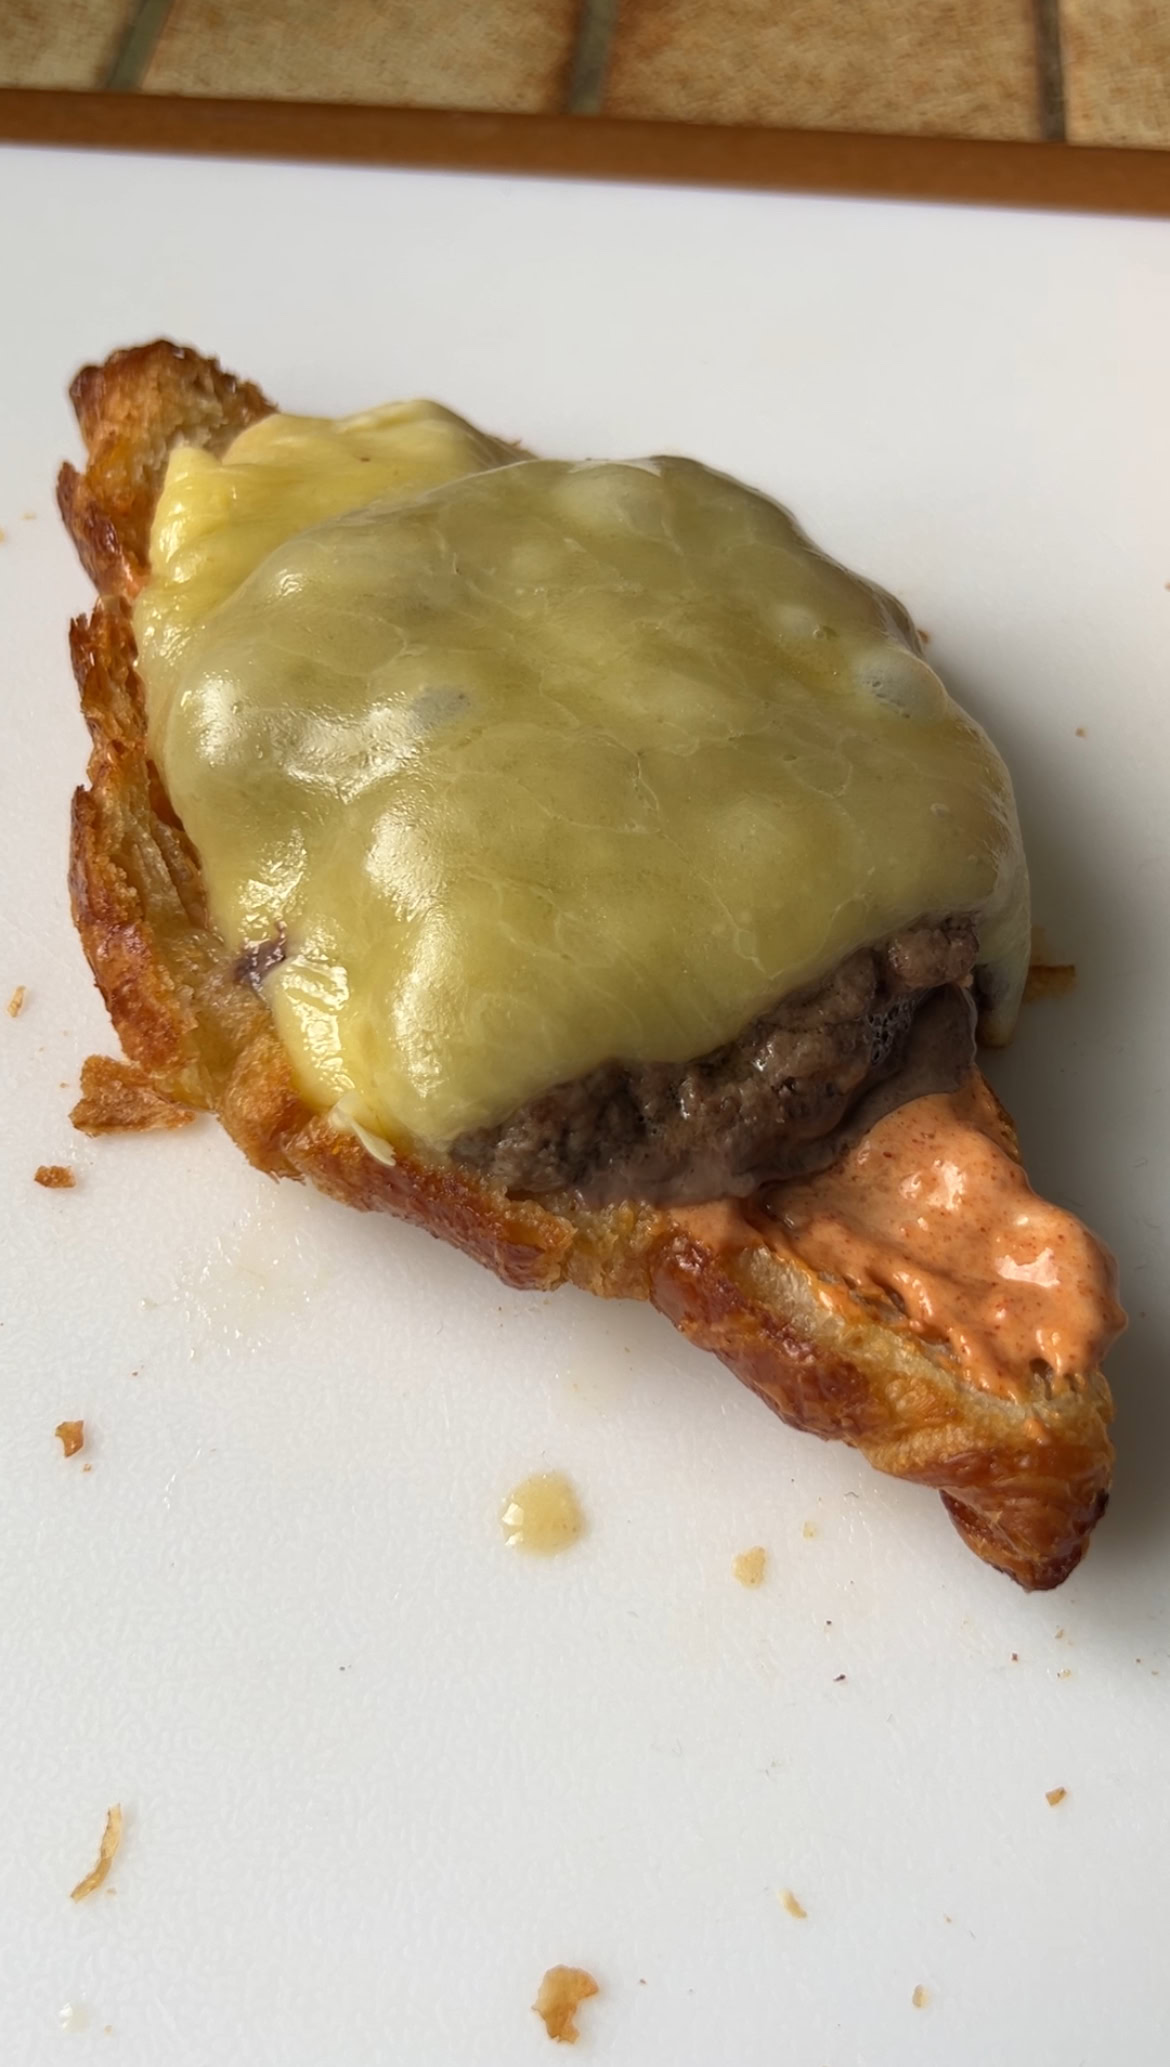 Meat covered with melted cheese added to the sauce, on the half croissant.